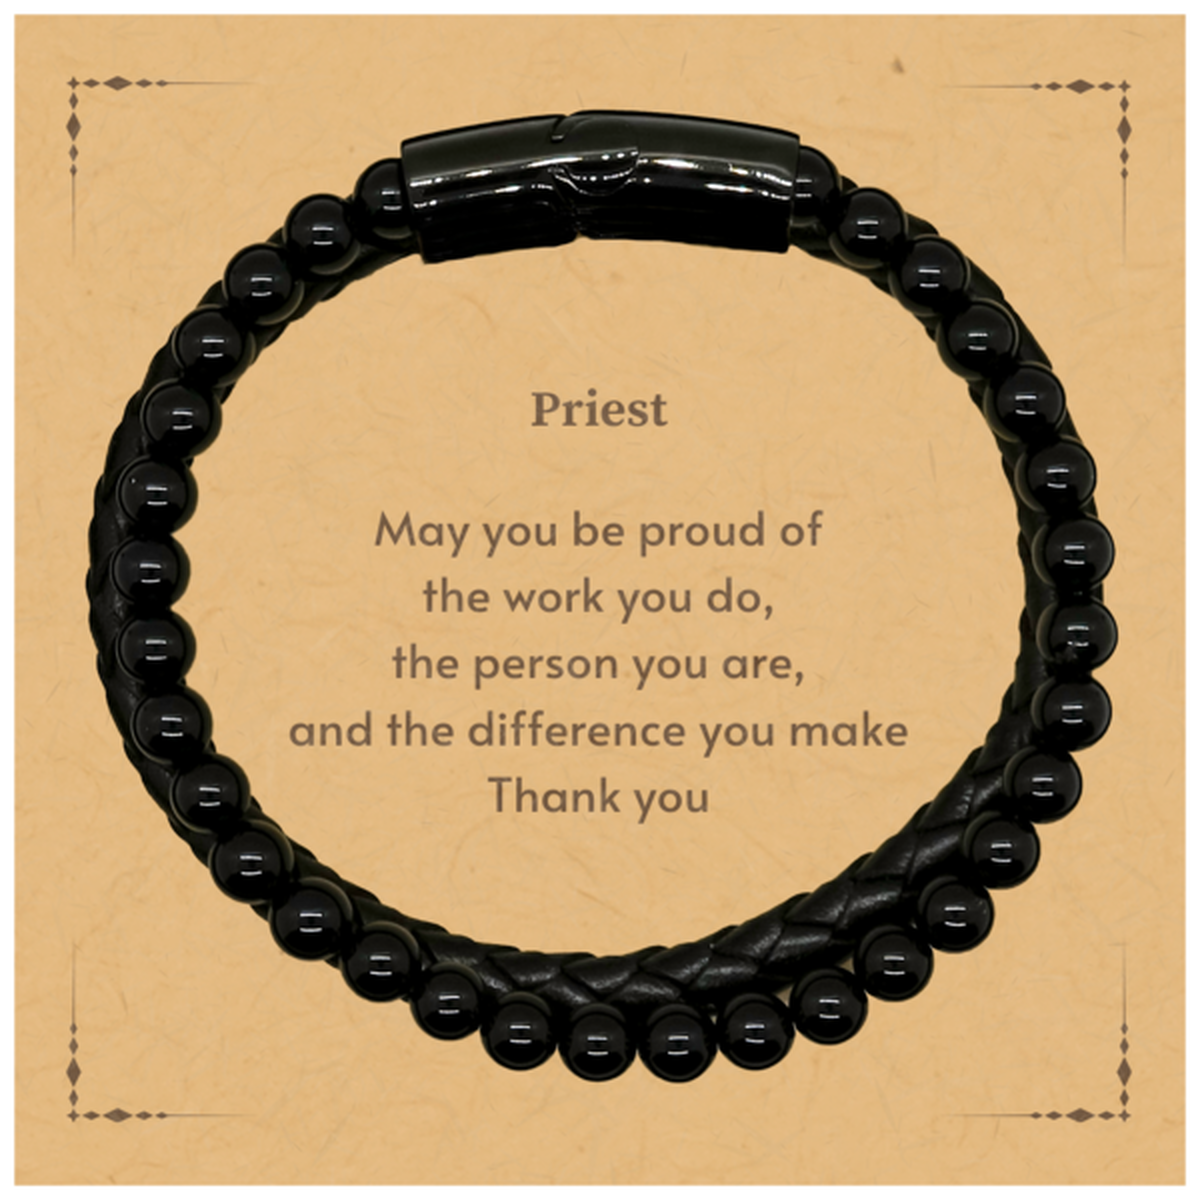 Heartwarming Stone Leather Bracelets Retirement Coworkers Gifts for Priest, Priest May You be proud of the work you do, the person you are Gifts for Boss Men Women Friends